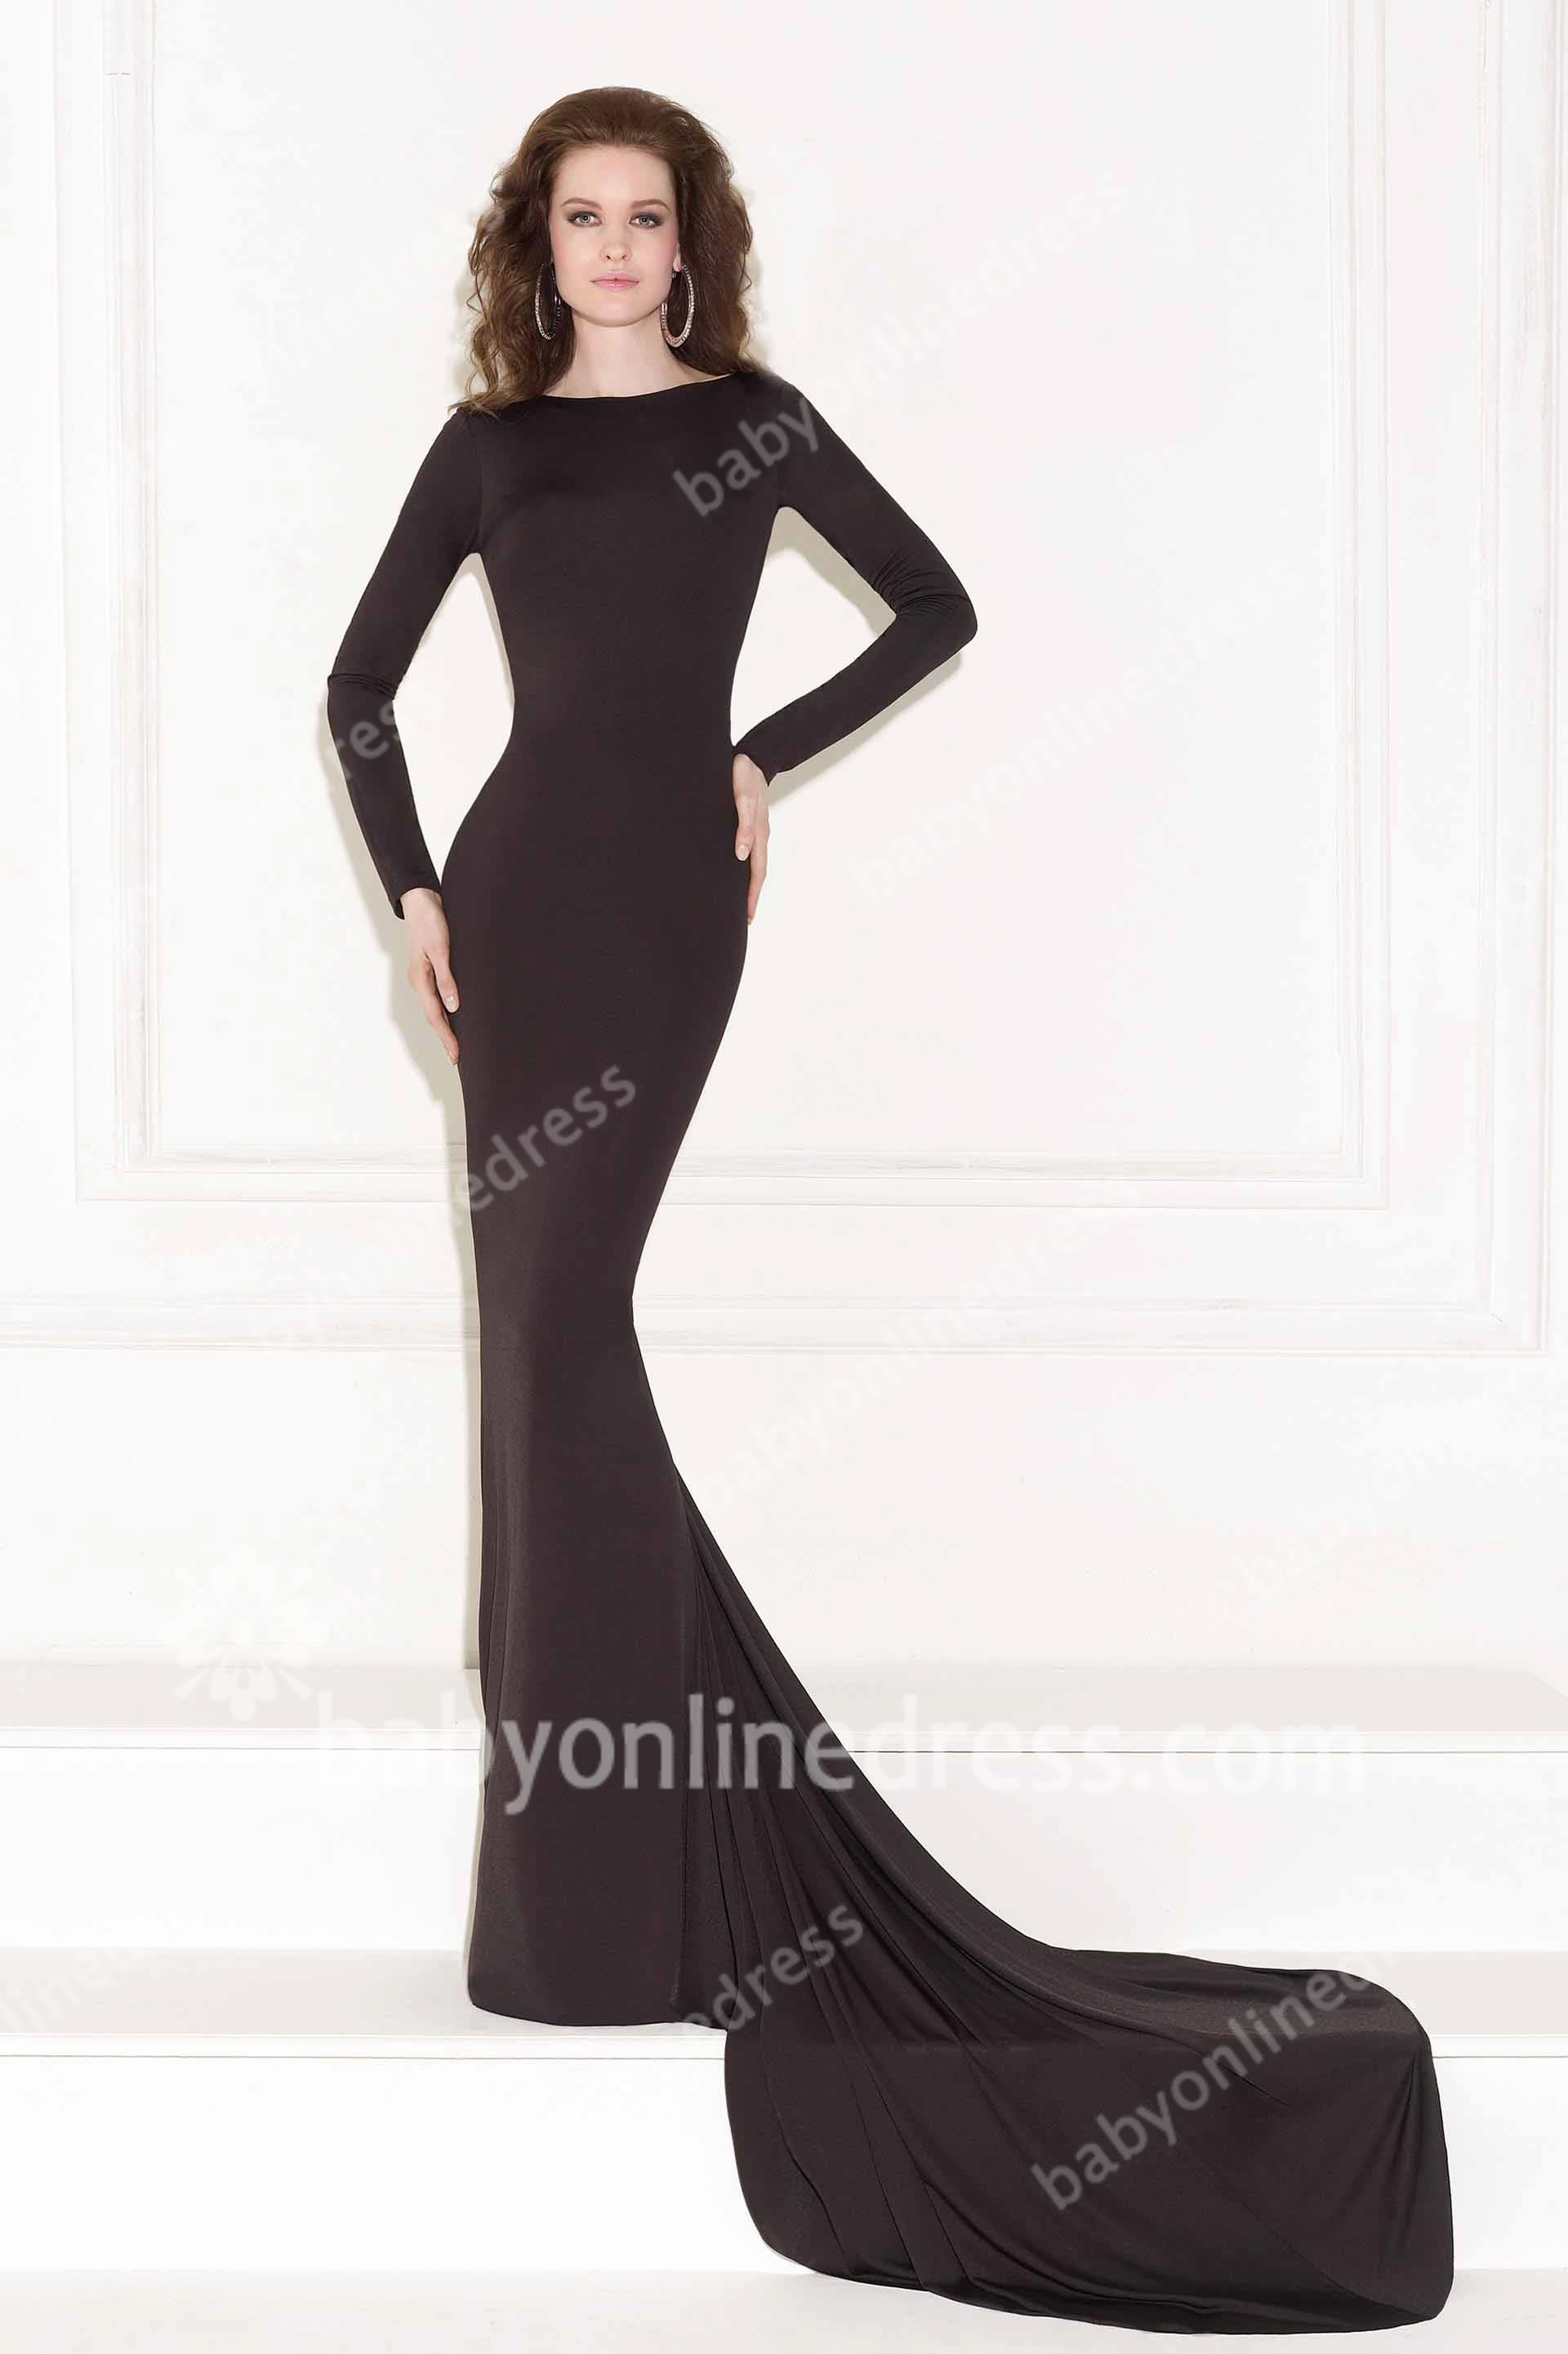 Black Long Sleeve Backless Prom Dress - Always In Fashion For All Occasions